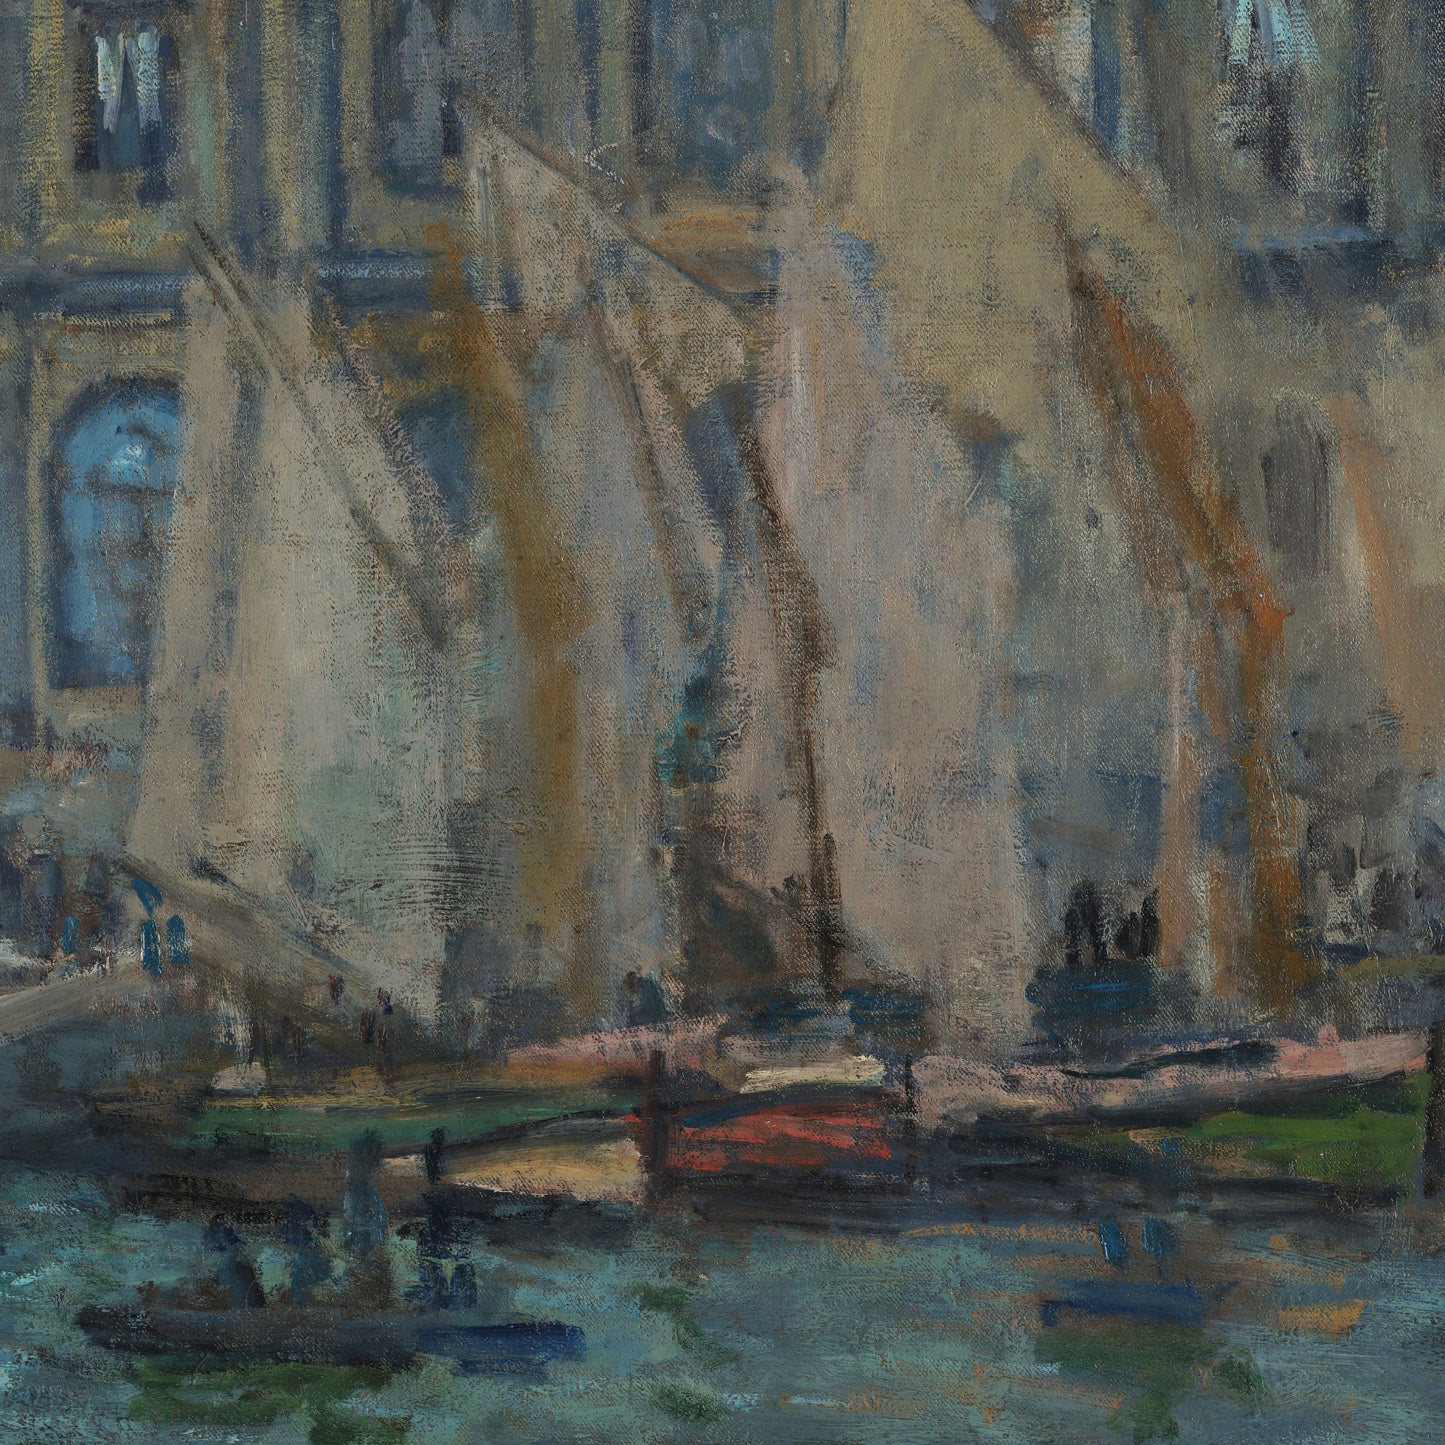 The Museum at Le Havre by Claude Monet, 3d Printed with texture and brush strokes looks like original oil-painting, code:377